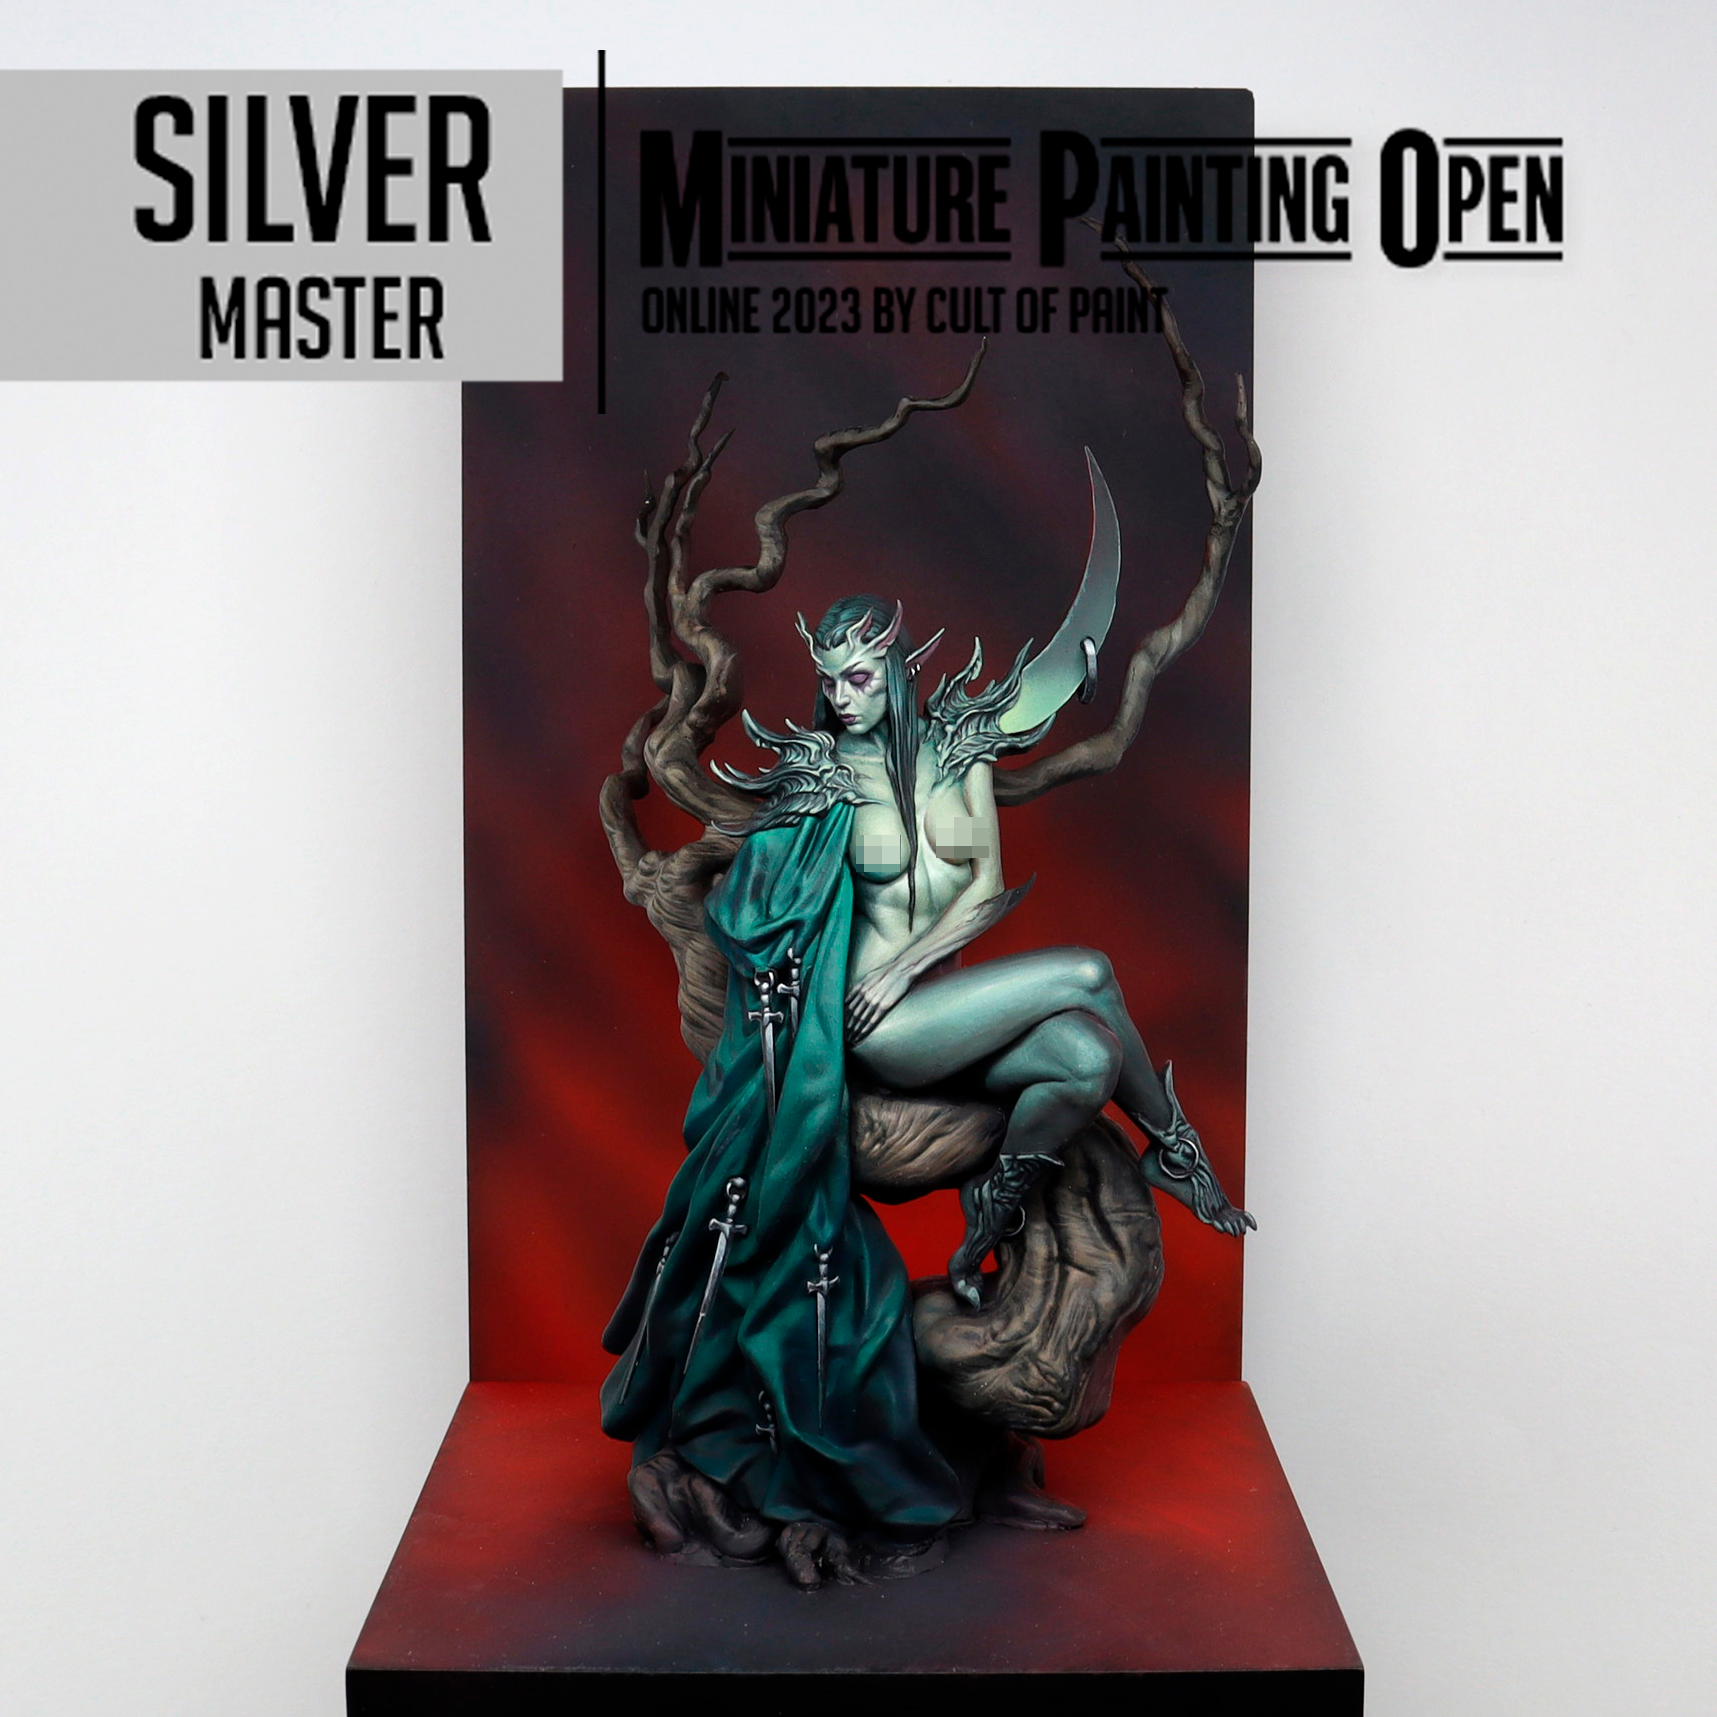 Fig 3. Miniature Painting Open - Silver Master